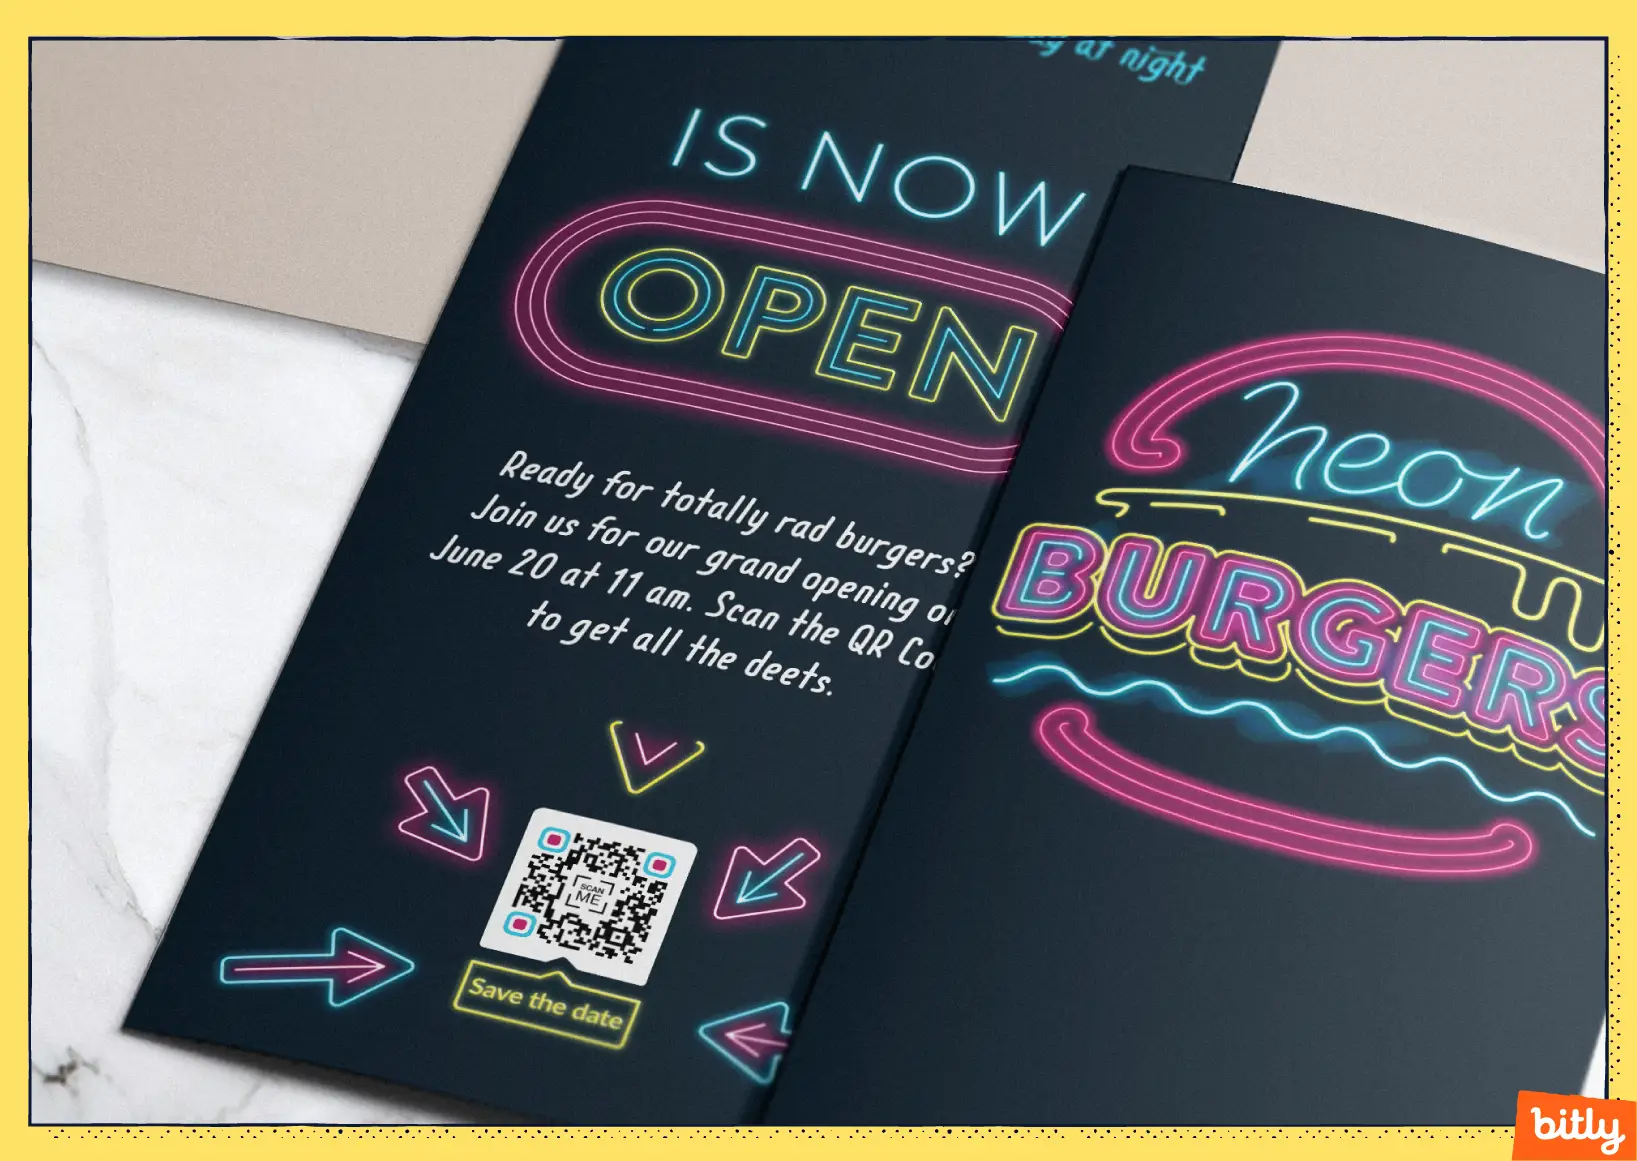 A brochure showcasing a burger restaurant with a QR Code that says "Save the date" below it.